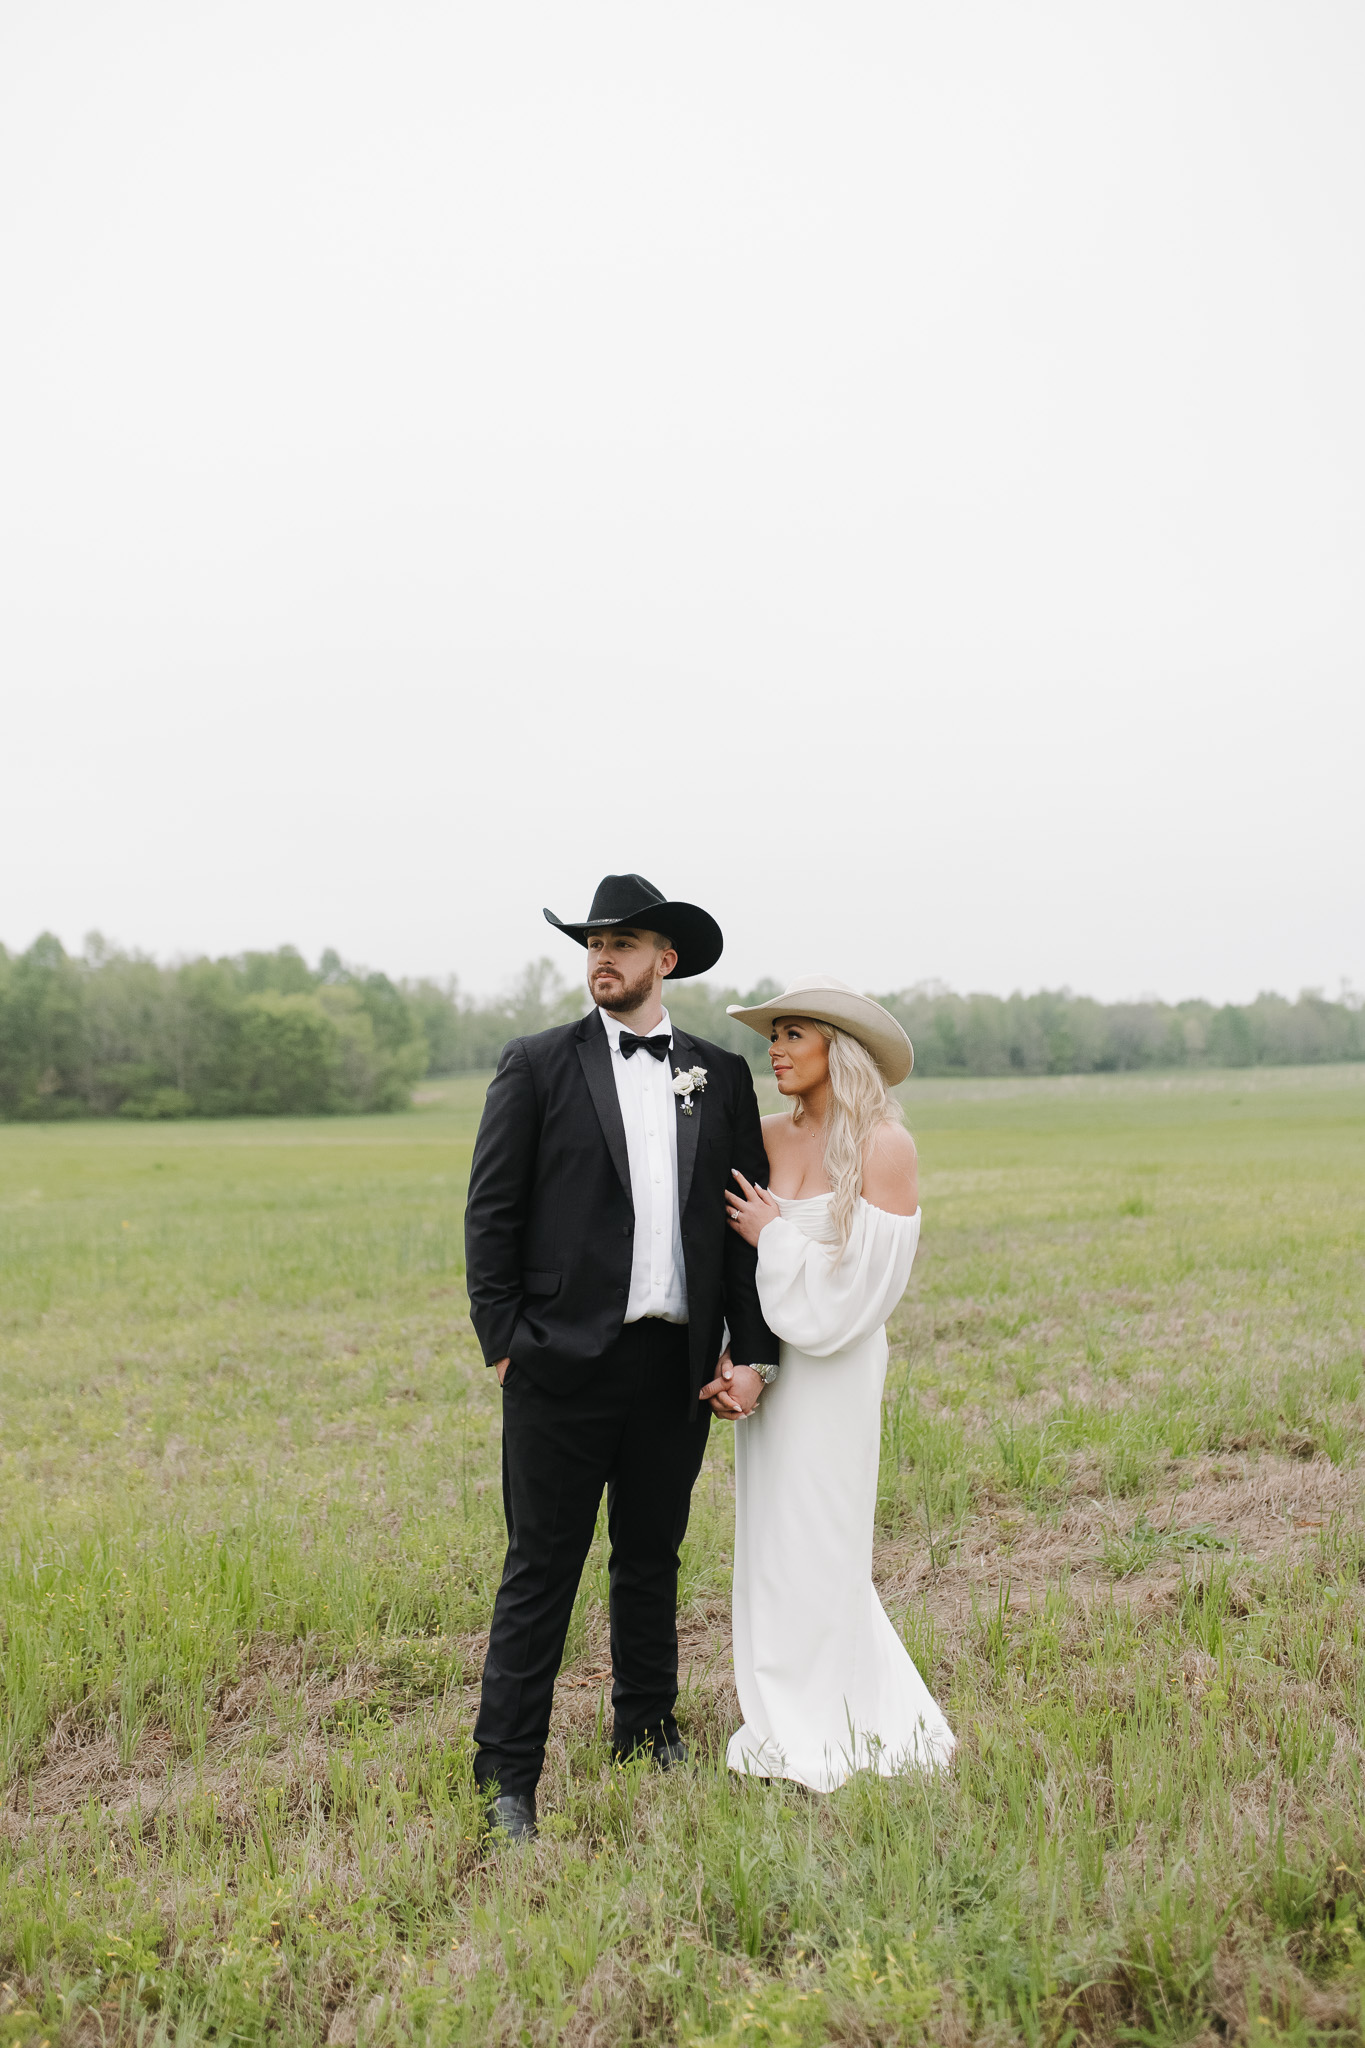 Nashville Tennessee wedding day, bride and groom portraits in the open grass field at the venue, The Monroe on 415th